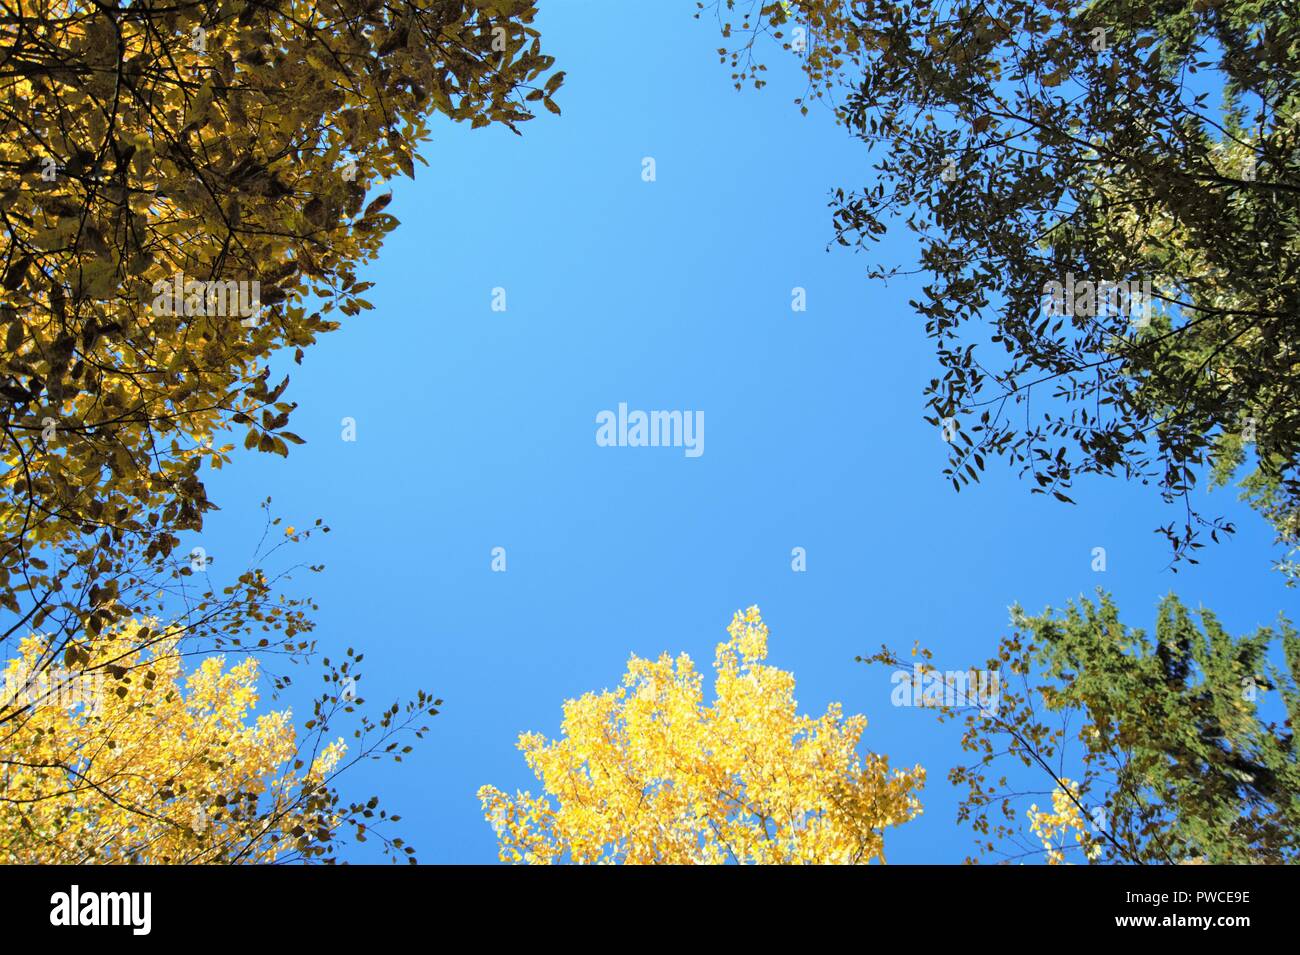 Patch of clear blue sky encircled by autumn Trees with brown and yellow foliage. Stock Photo